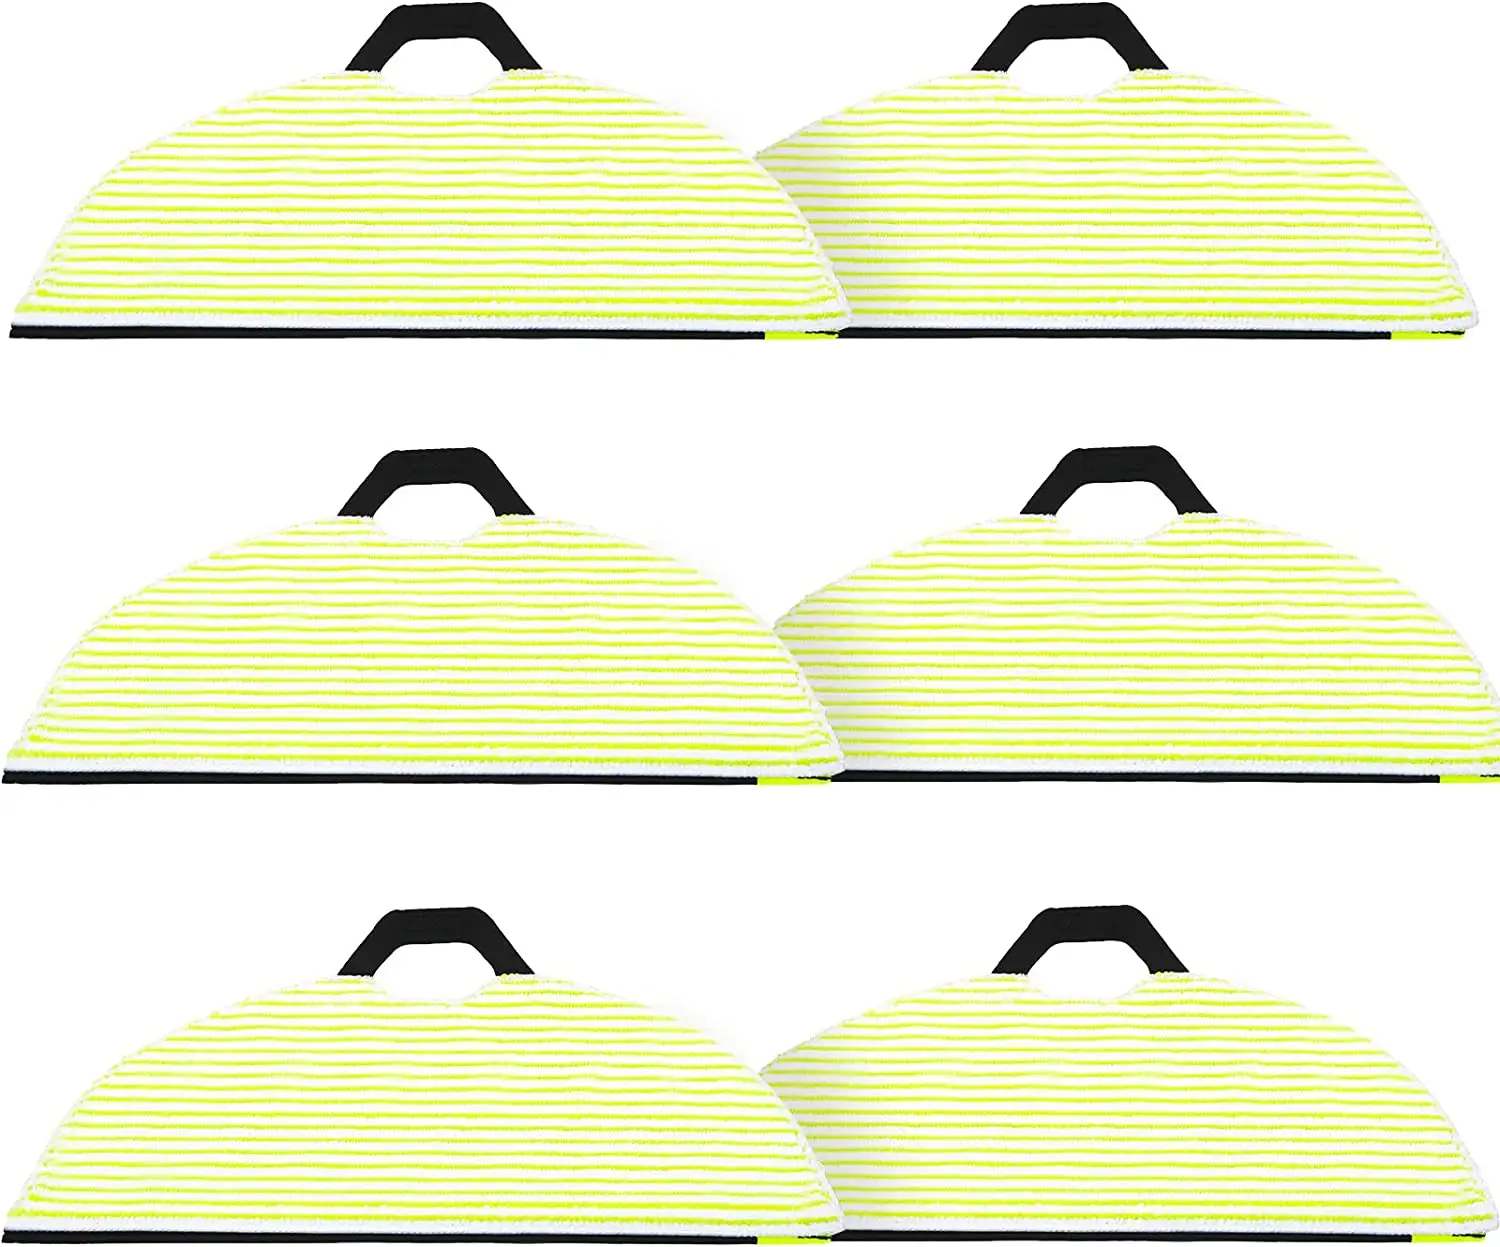 Vacuum Mop Replacement Pads for SharKs AV2610WA AV2001WD RV2610WA RV2001WD RV2000WD Robot Vacuum, Washable Reusable Replacement